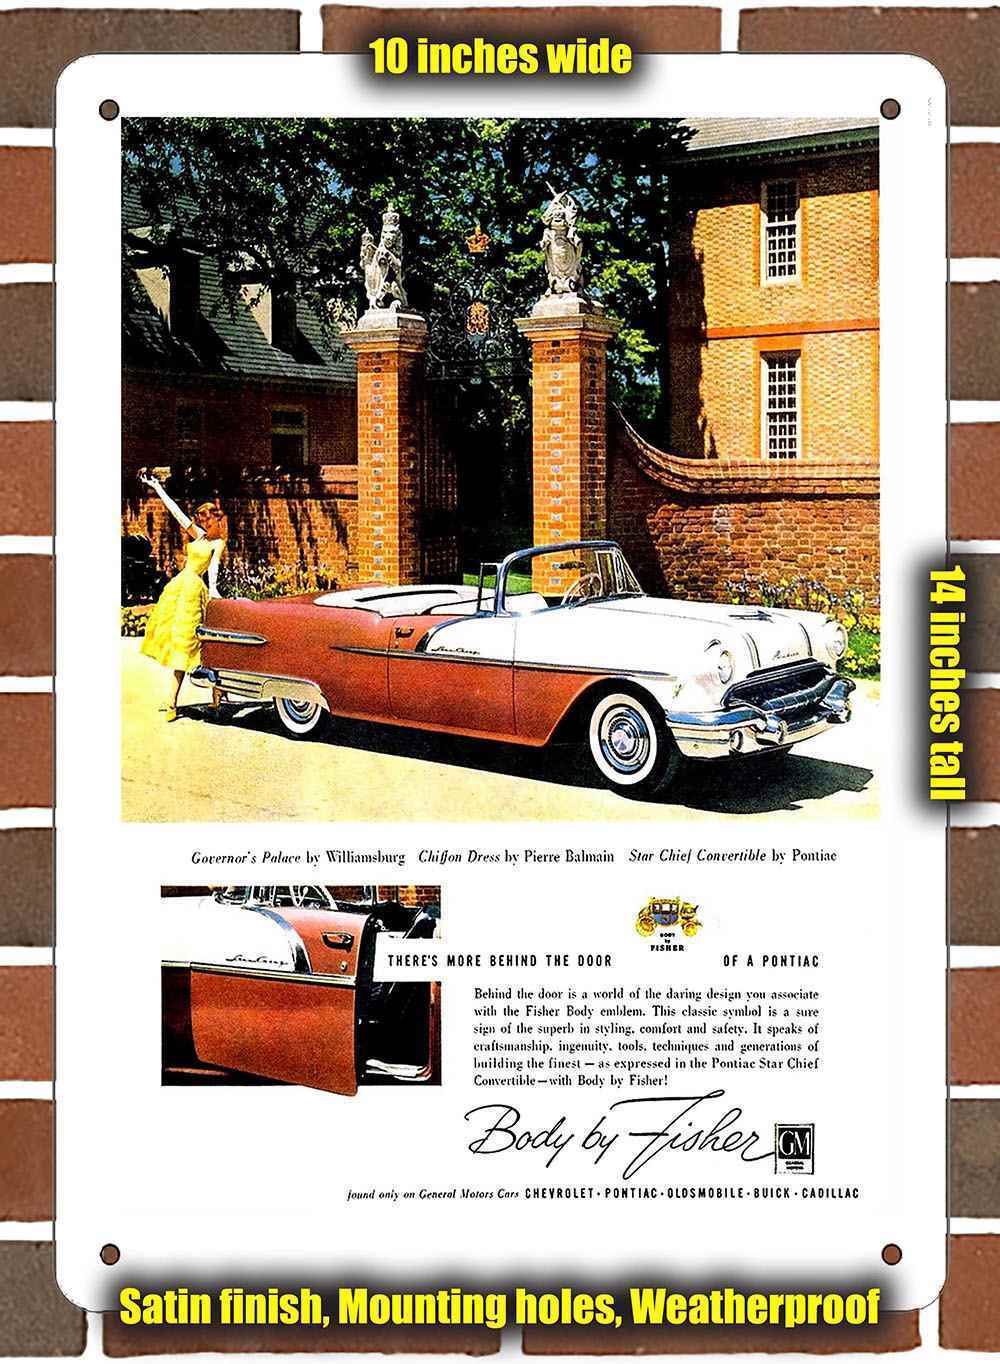 Metal Sign - 1956 Pontiac Body by Fisher - 10x14 inches